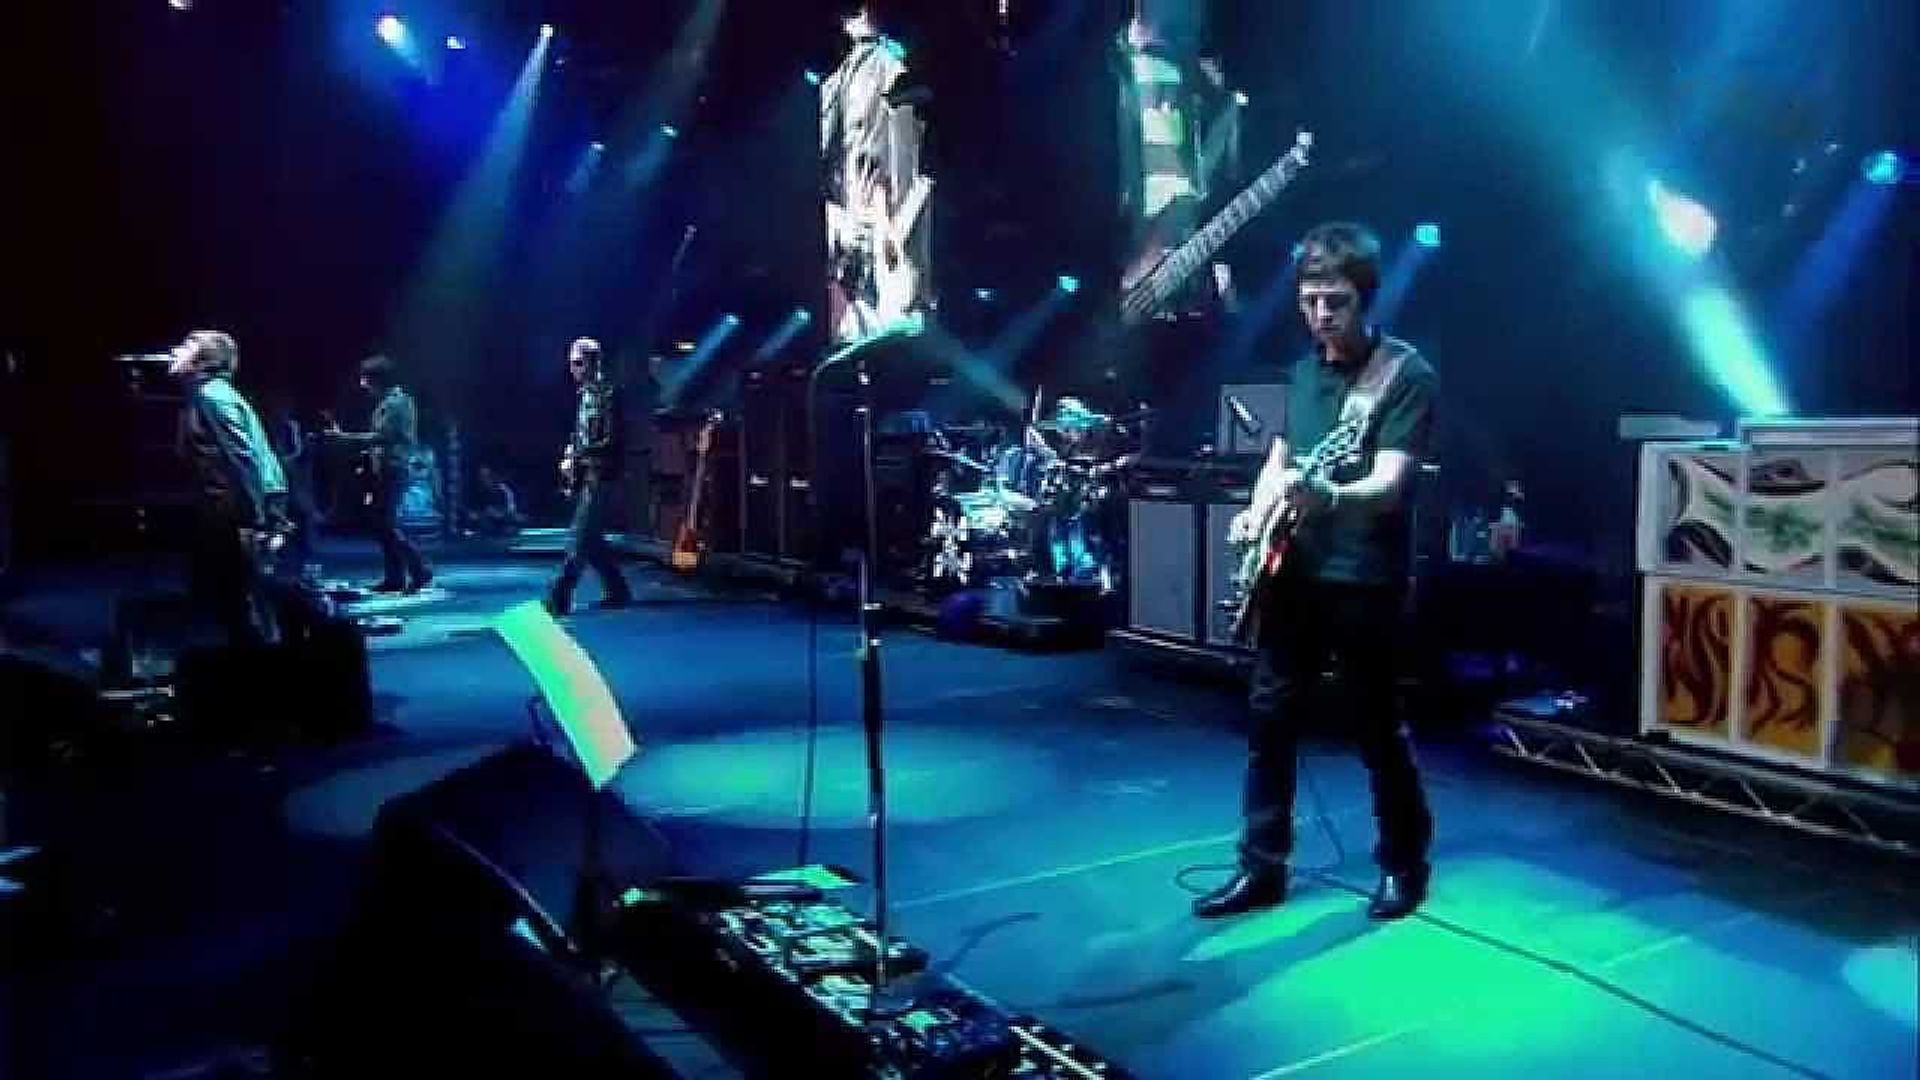 MTV Live: Oasis Live from Wembley background